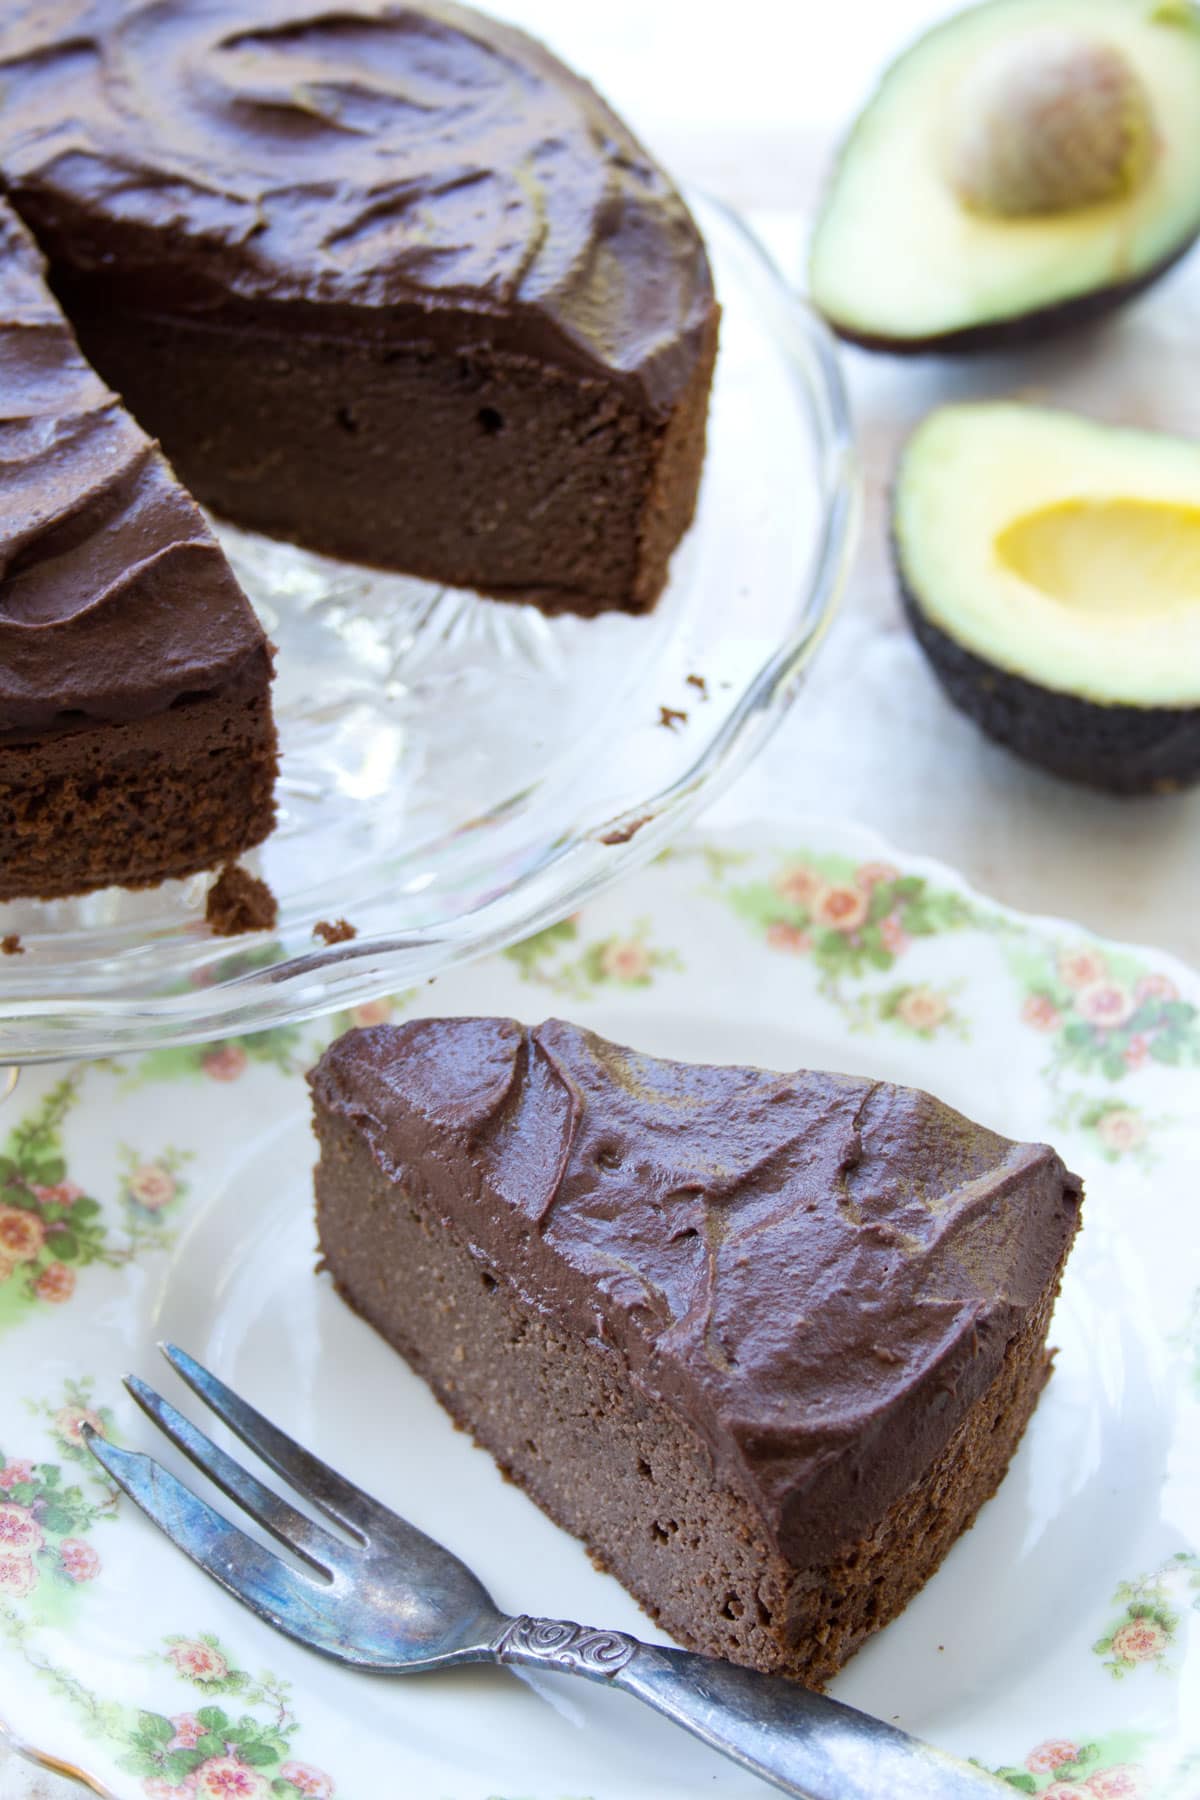 A slice of avocado chocolate cake on a plate with a fork.